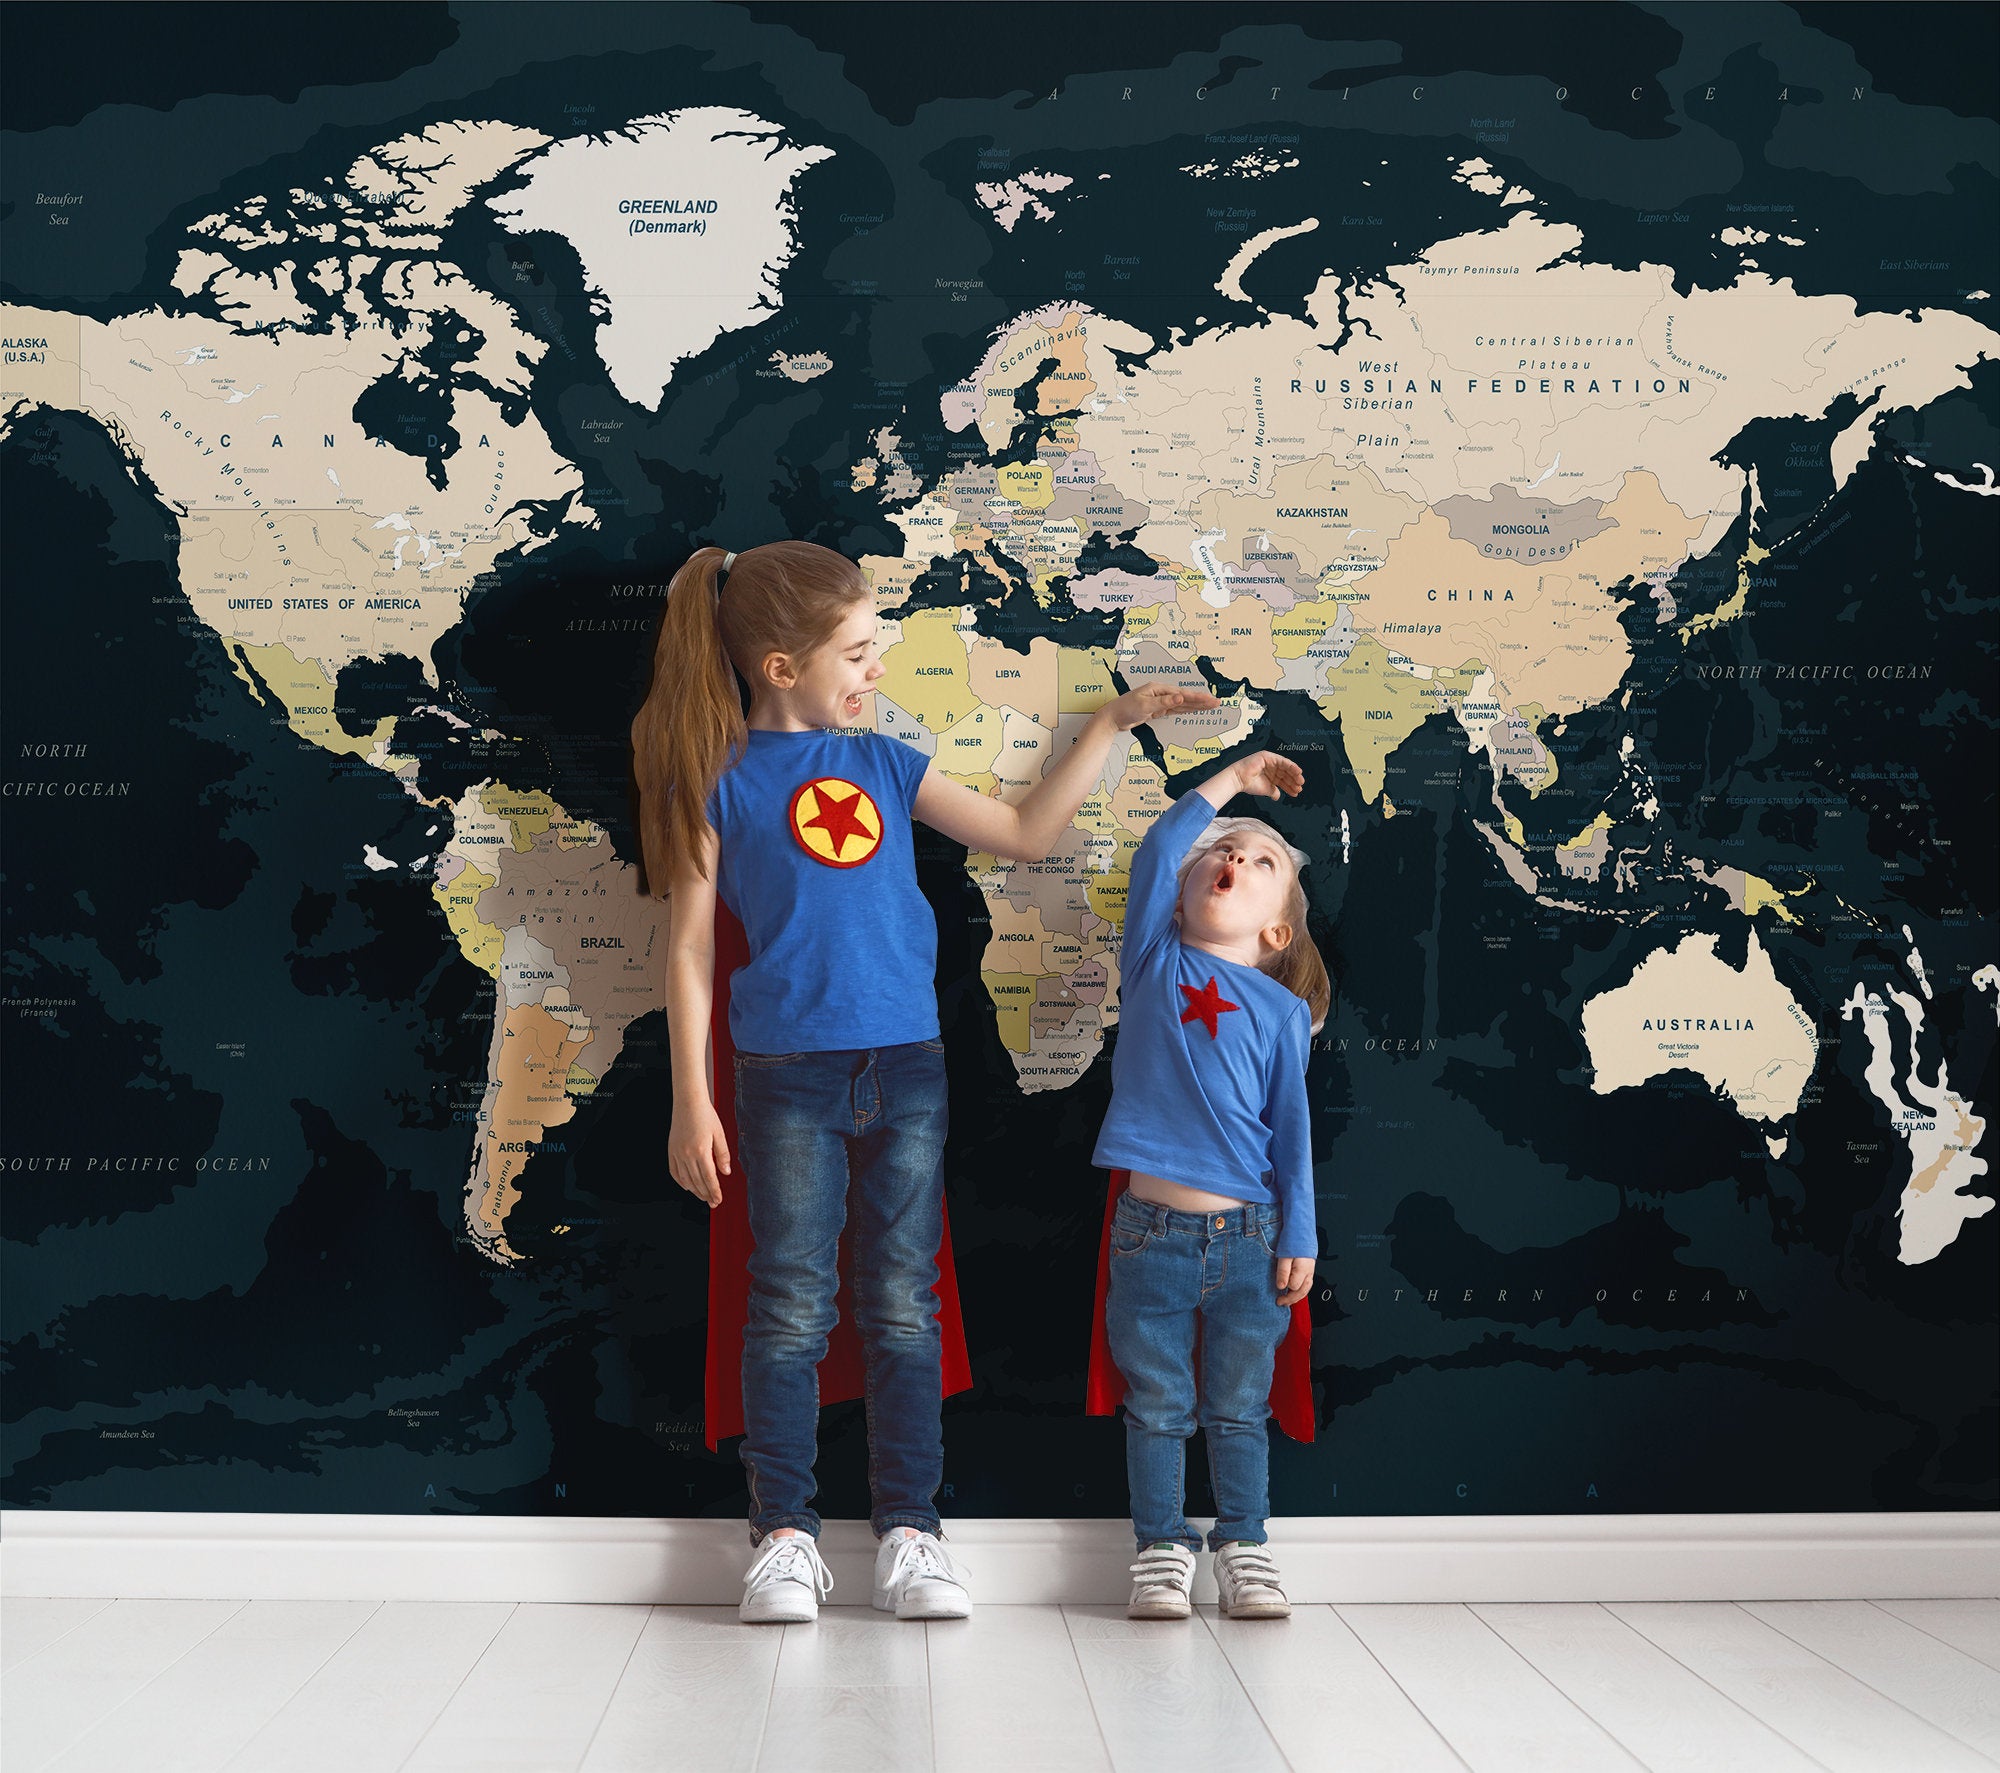 World Map on the Dark Blue Background Wallpaper Self Adhesive Peel and Stick Wall Sticker Wall Decoration Removable